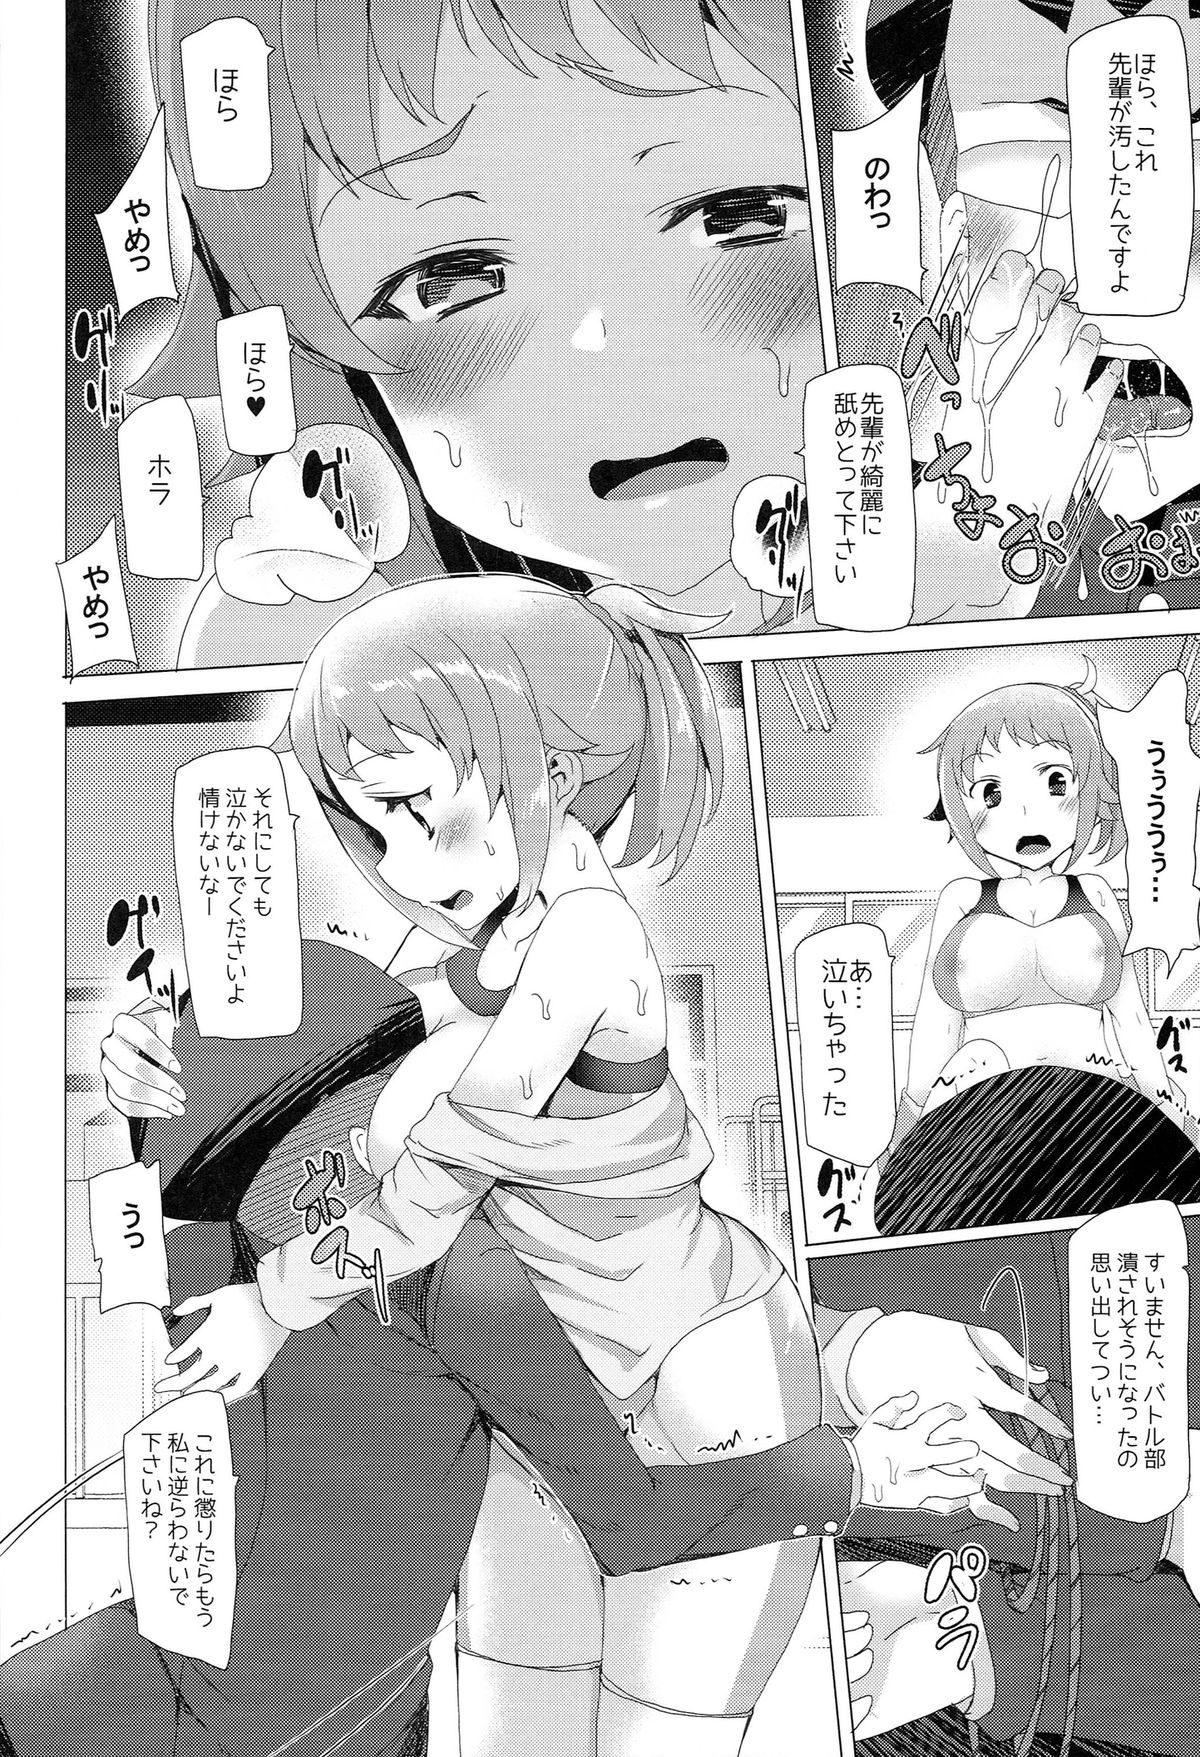 [Waffle Doumeiken (Tanaka Decilitre)] Yariman Bitch Fighters (Gundam Build Fighters Try) page 22 full